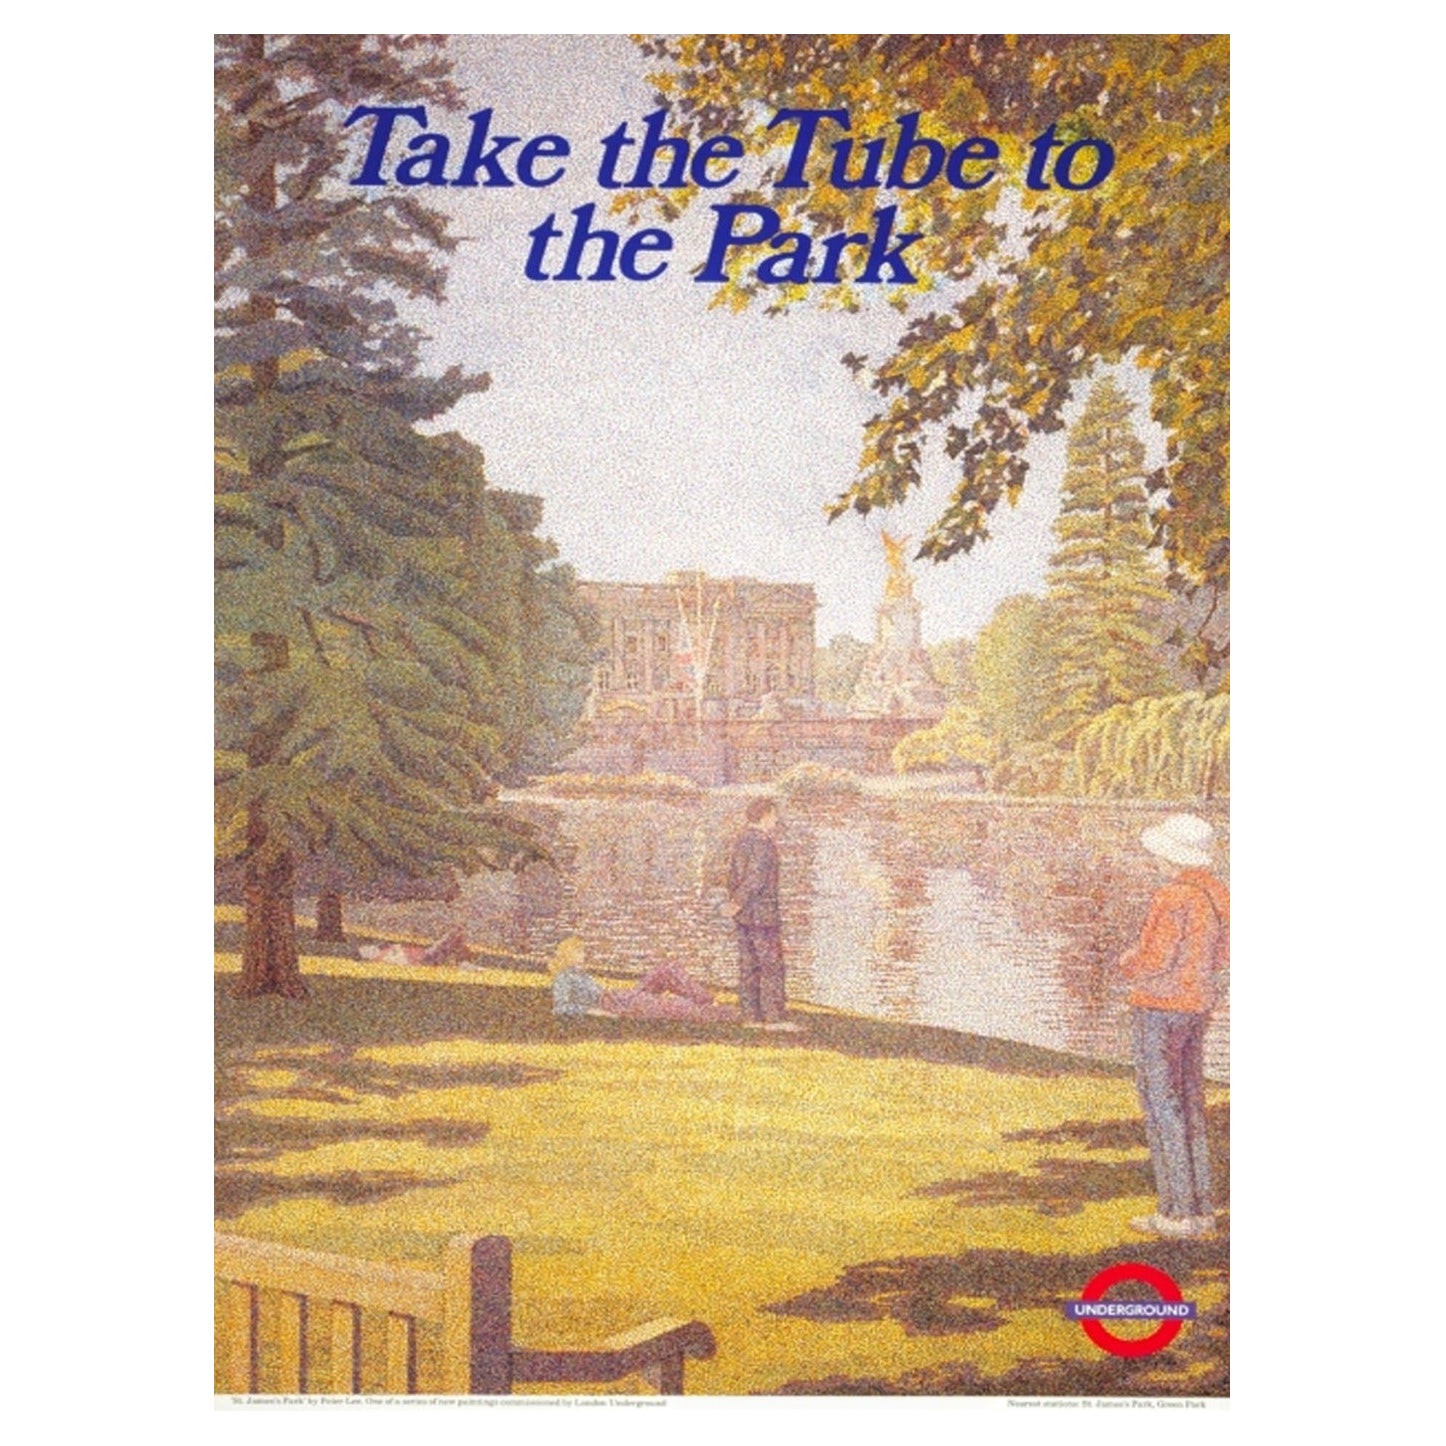 1986 TFL - Take the Tube to the Park Original Vintage Poster For Sale